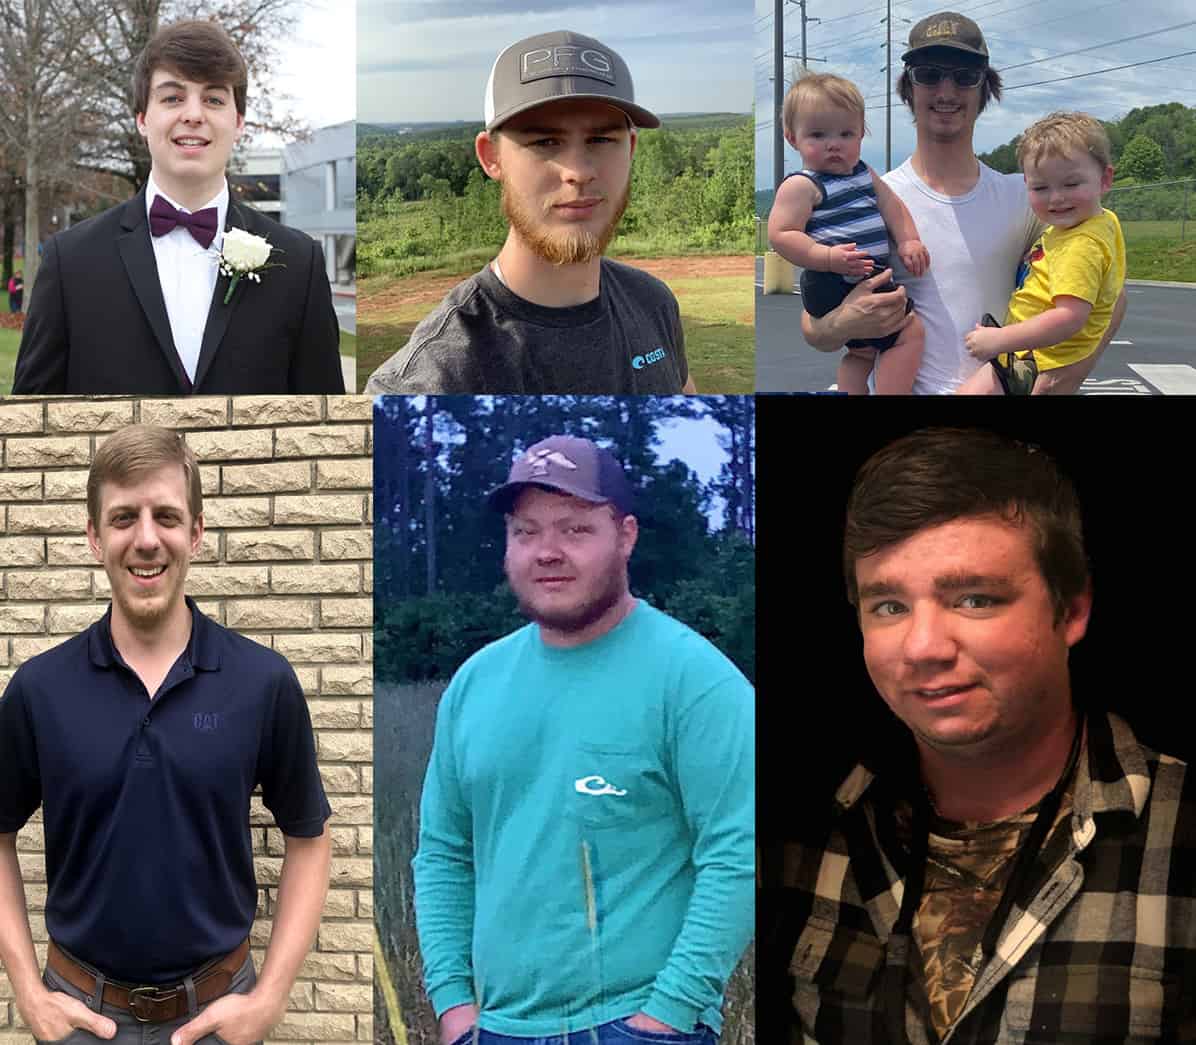 Shown above are the SGTC Thompson Tractor CAT students who were awarded the 2020 Adrian “Goose” Johnson tool scholarships. Shown (top left to right) are: Colton Rains, Caleb Smith, and Brett Lacy. Shown (bottom l to r) are: Lance Garrett, Noa James, and Quinton Zirlot. Not shown are: Garrett Sanford, and Clay Stewart.